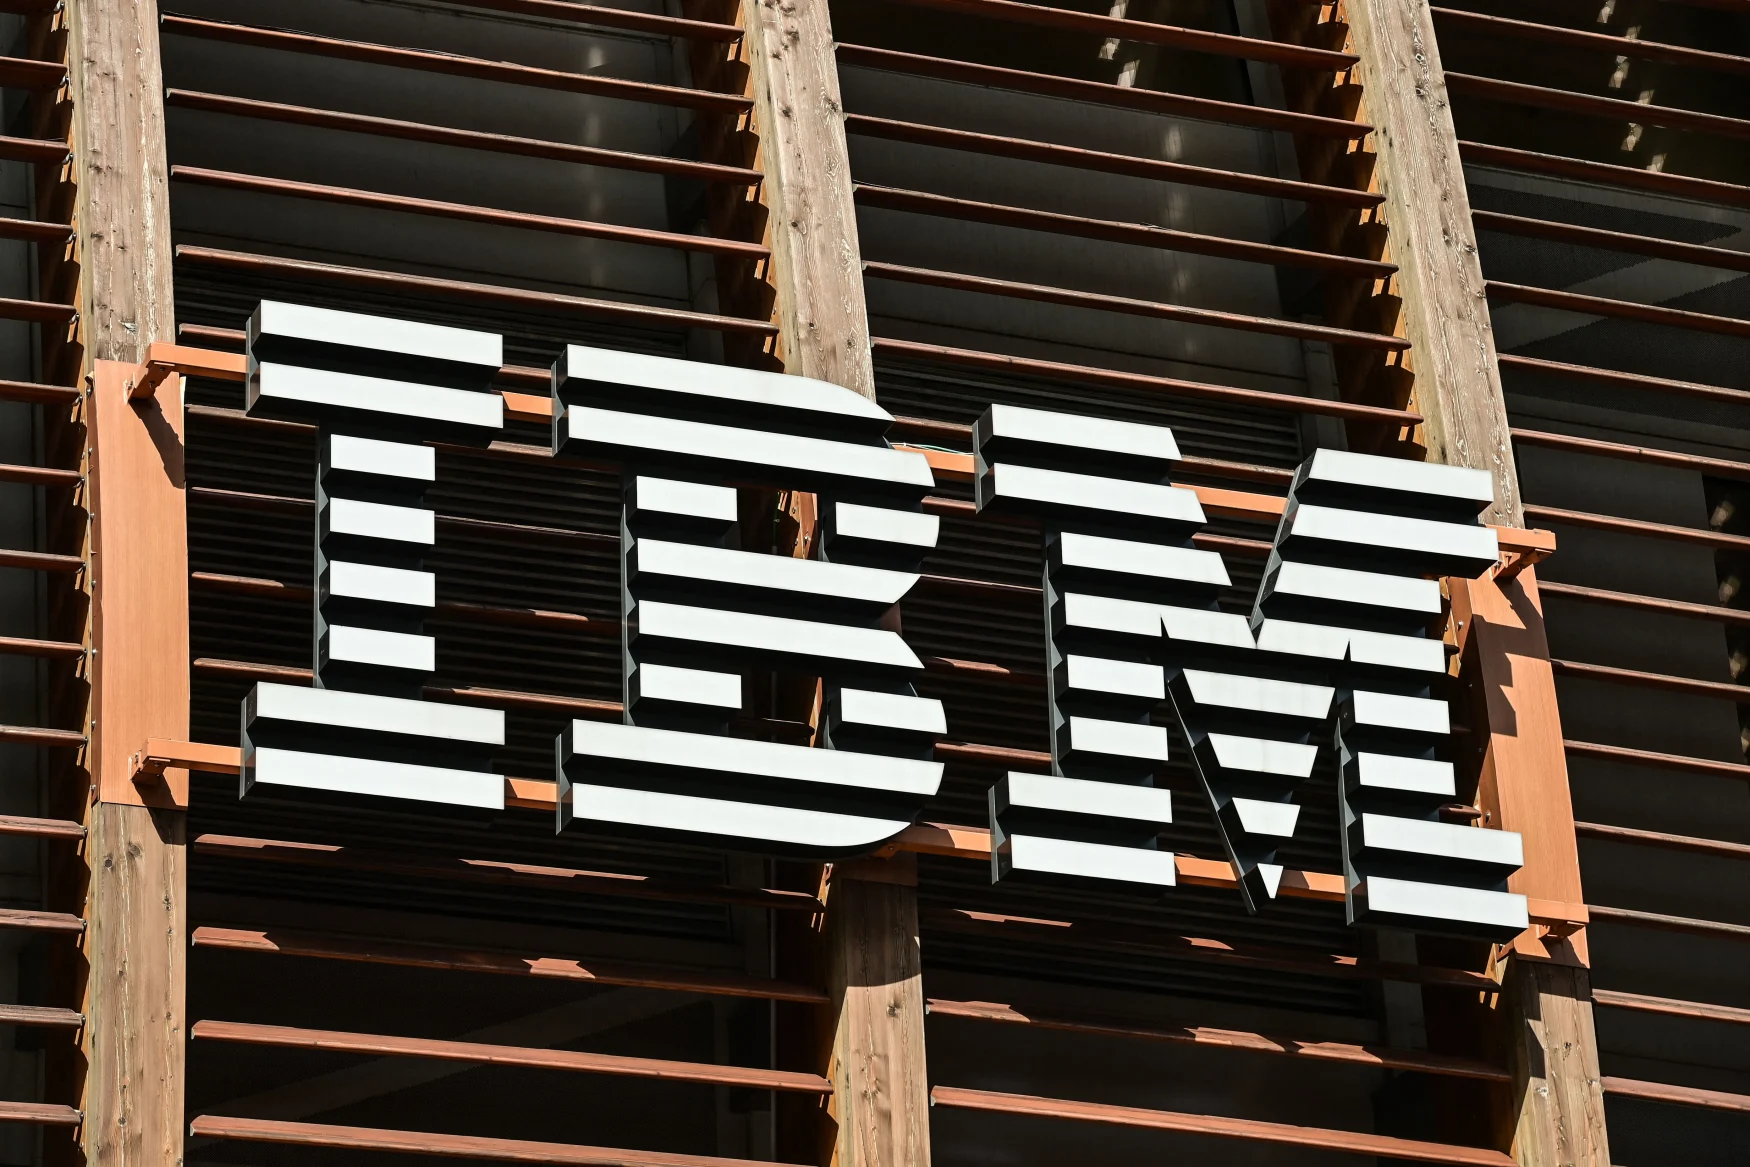 The IBM logo is displayed in the trendy Garibaldi-Porta Nuova district of Milan on June 22, 2021. (Photo by MIGUEL MEDINA/AFP) (Photo by MIGUEL MEDINA/AFP via Getty Images)